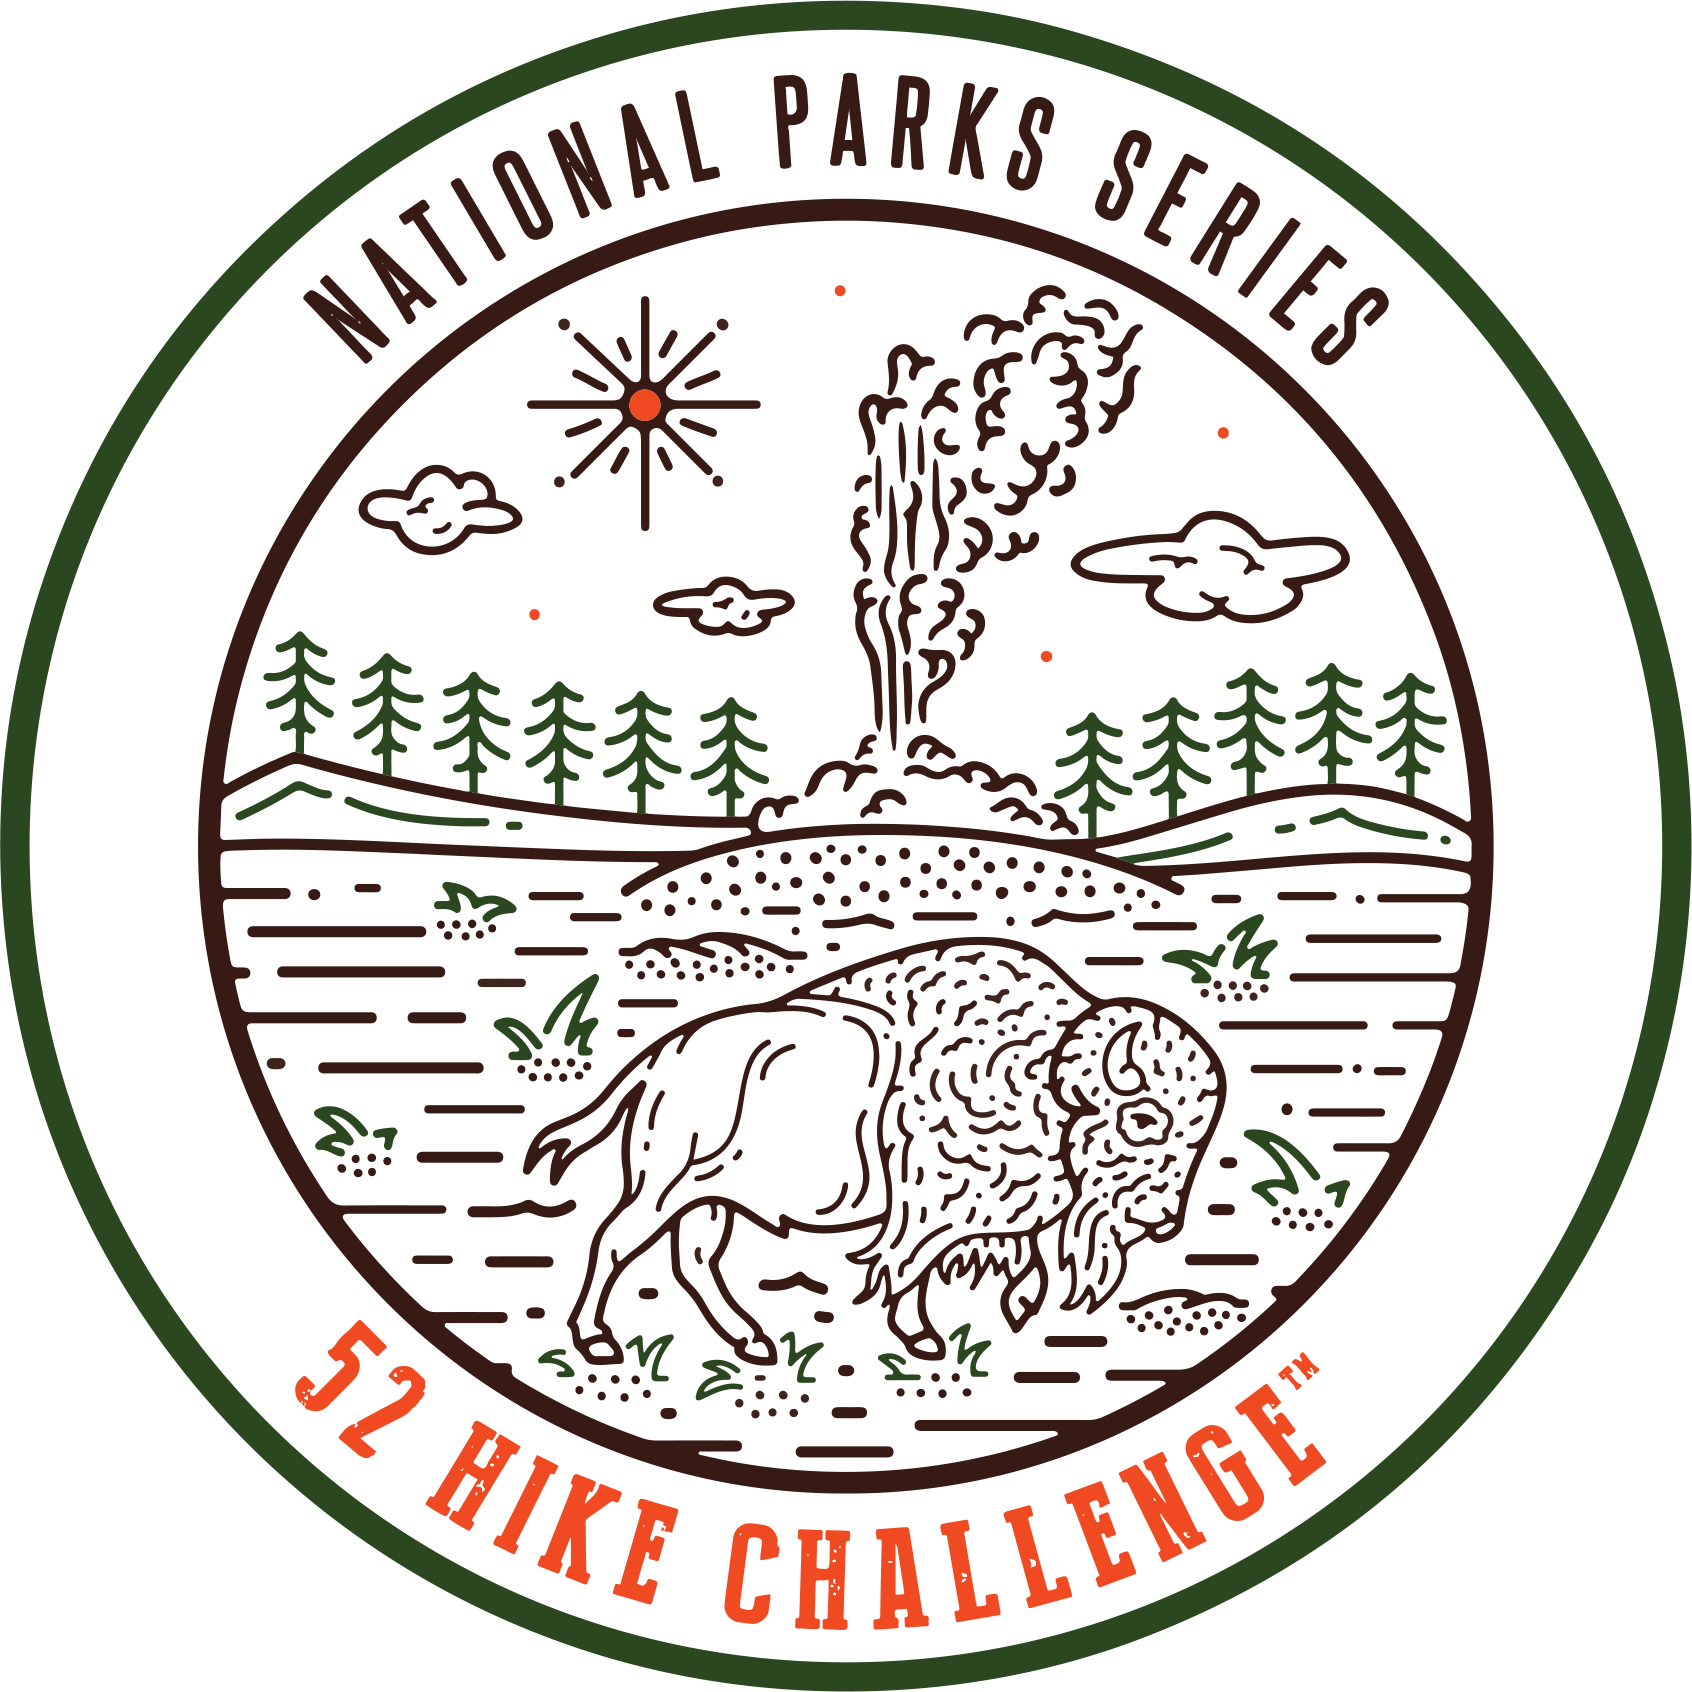 52 Hike Challenge National Parks Series Stickers + Patch Bundle